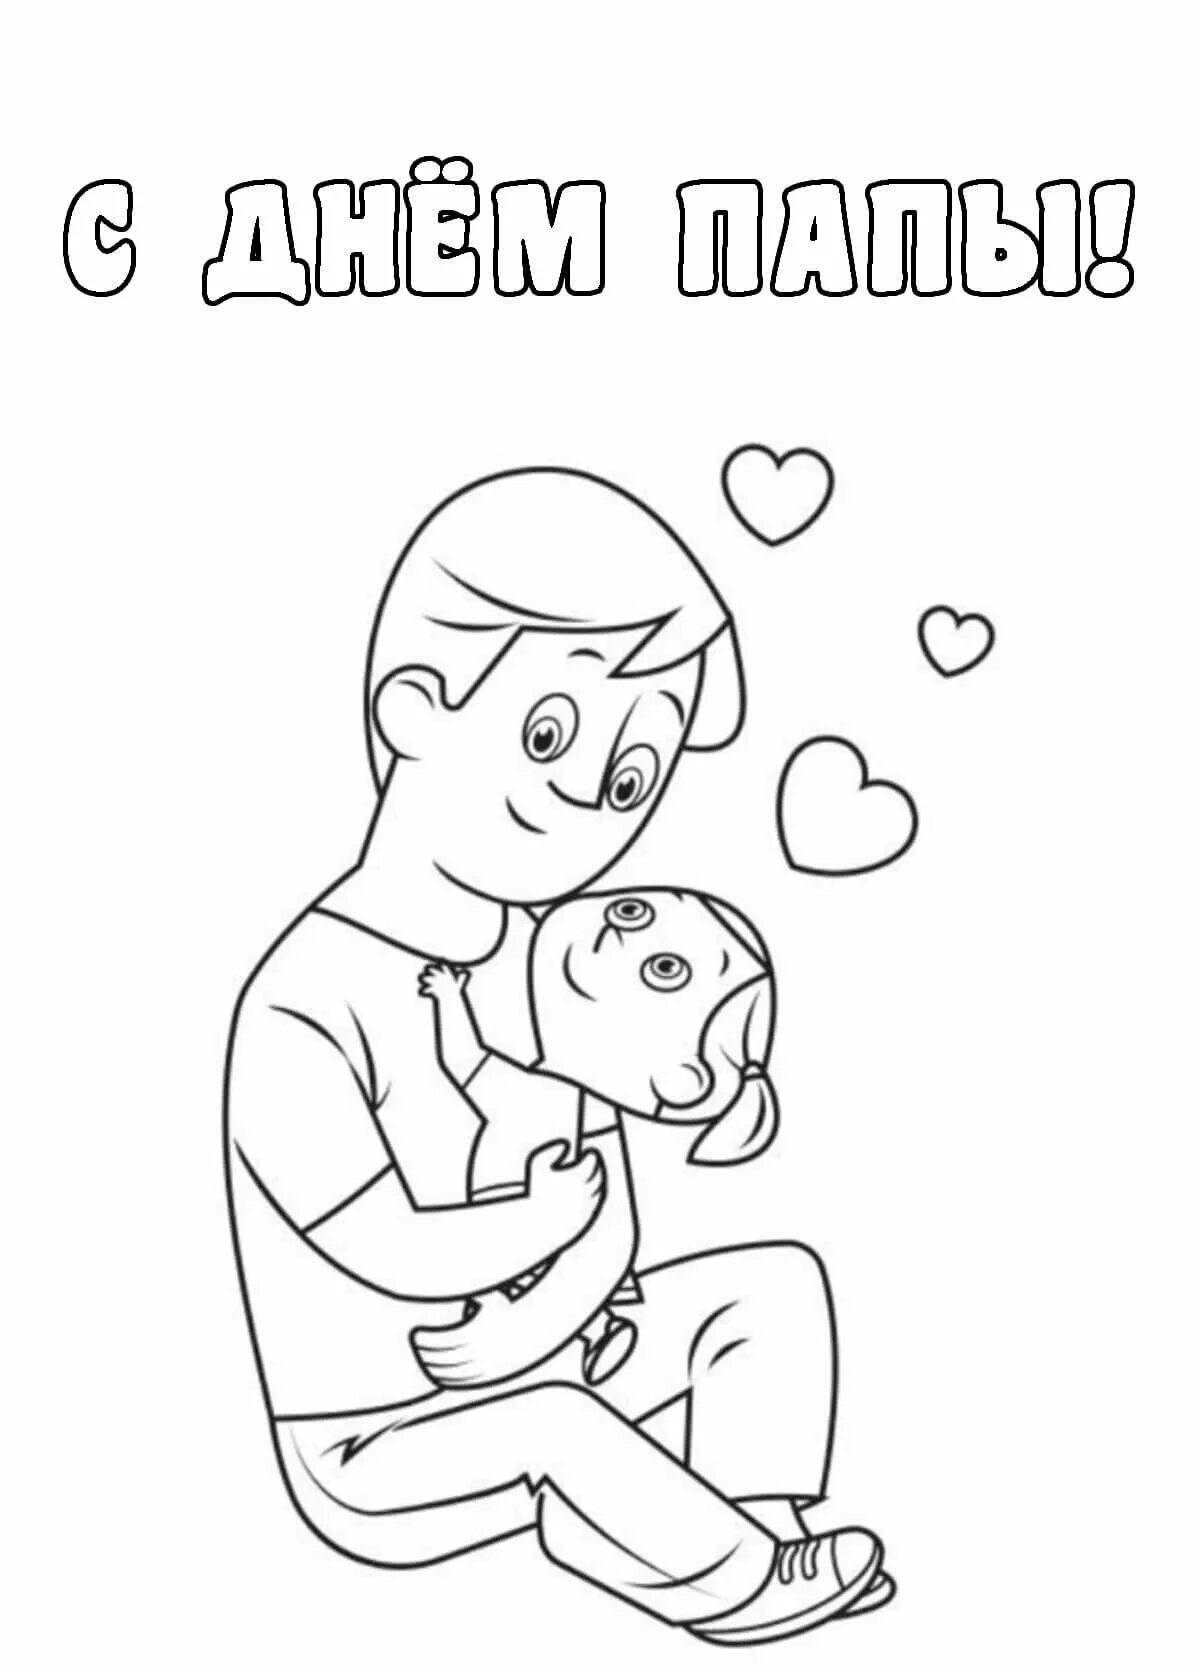 Happy coloring book for dad for dad's day